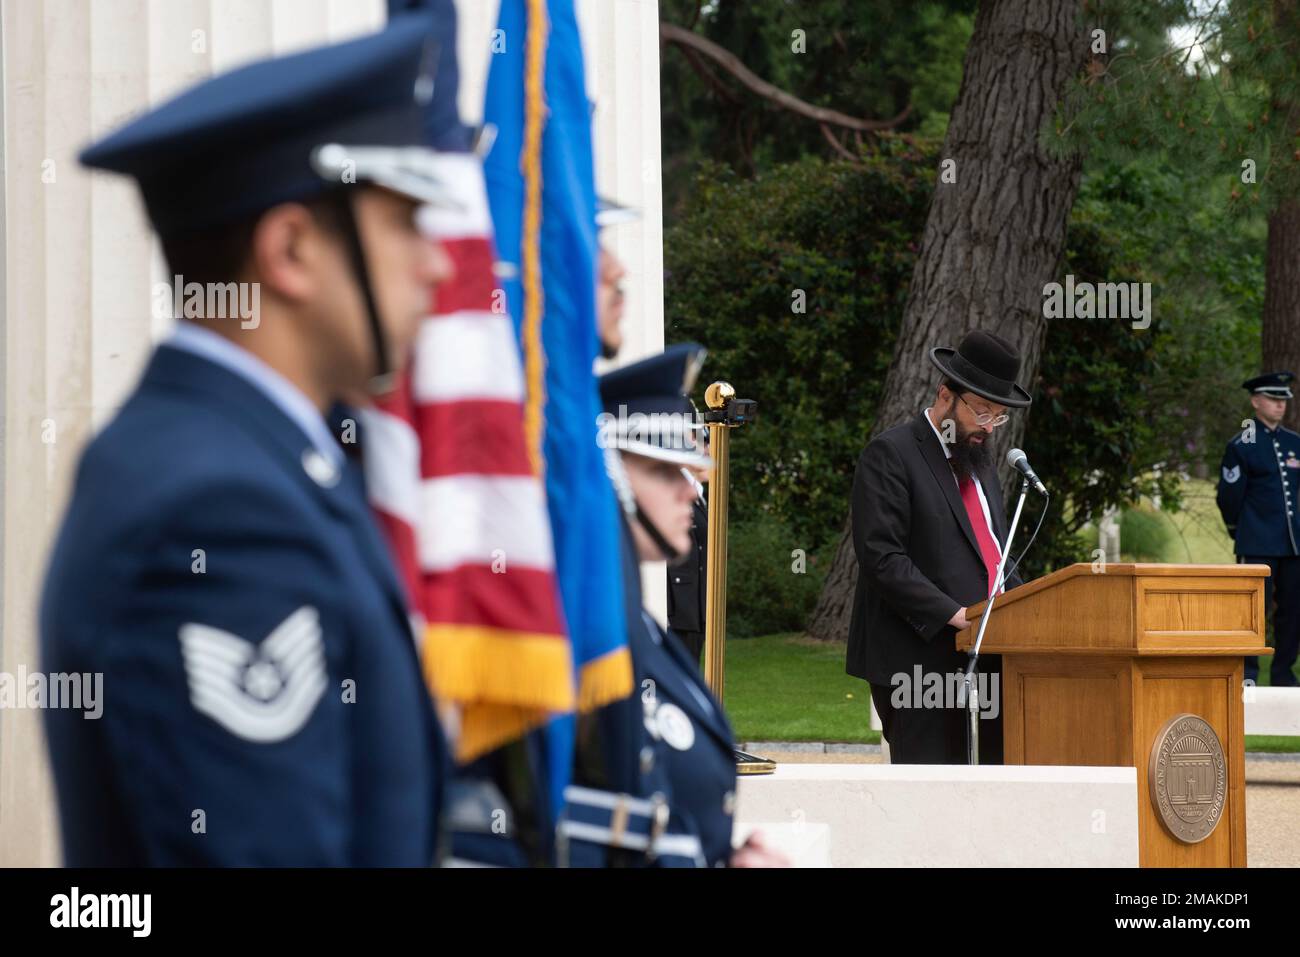 Rabbi Yechezkel Mandelbaum, right, Rabbi of Kingston, Surbiton and District United Synagogue, leads an invocation during a Memorial Day ceremony at the Brookwood American Cemetery, England, May 29, 2022. Memorial Day provides us a solemn opportunity to remember our fallen brothers and sisters in arms, reflect upon their courageous sacrifice, and show gratitude for the freedom they gave their lives to defend. It also affords us the opportunity to pay homage to those families who lost their loved ones in service to the Nation-and continue to feel the full weight of that sacrifice today. Stock Photo